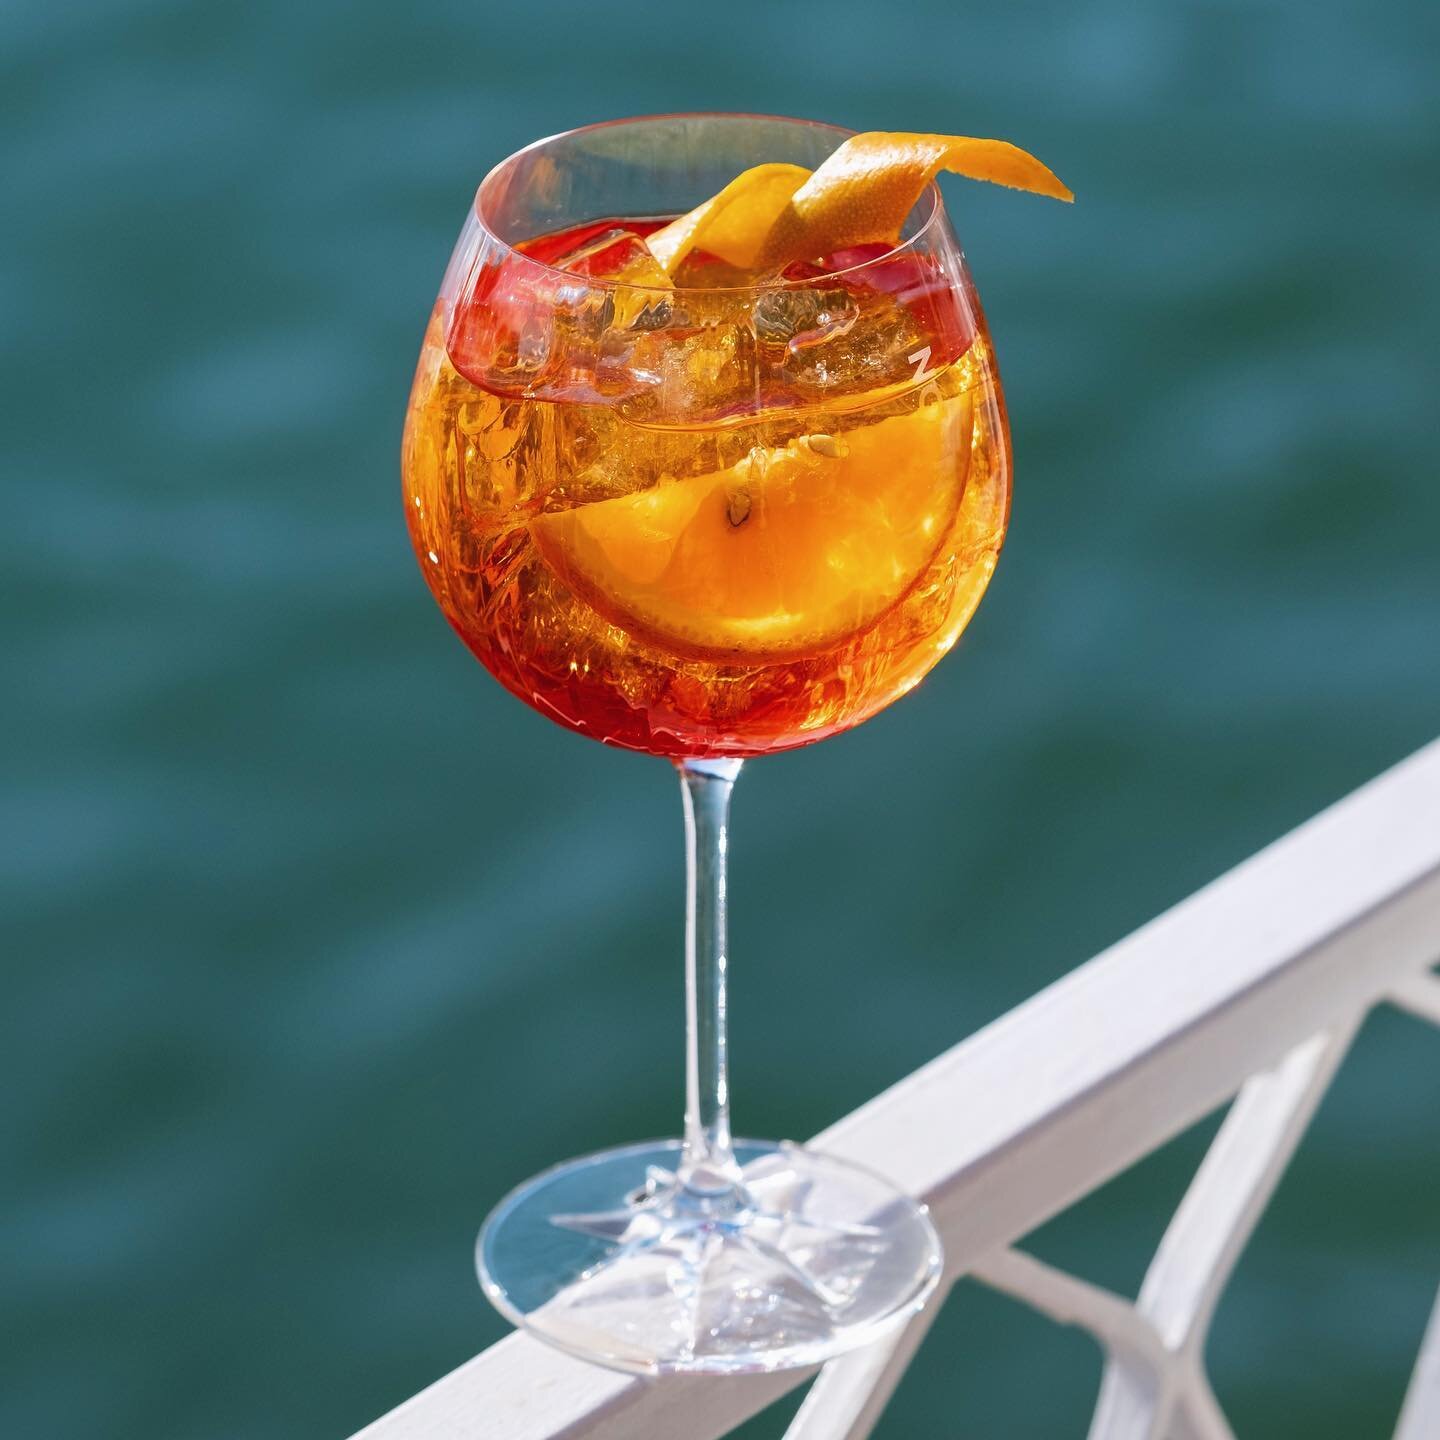 Aperitivo is not &lsquo;just a drink&rsquo; it&rsquo;s a way of life🇮🇹🍊#aperolspritz

Come join us to celebrate these last weeks of summer with some pre-dinner drinks served with a gorgeous sunset 🌅 here at La Boheme!!

| www.labohemedalyan.com |